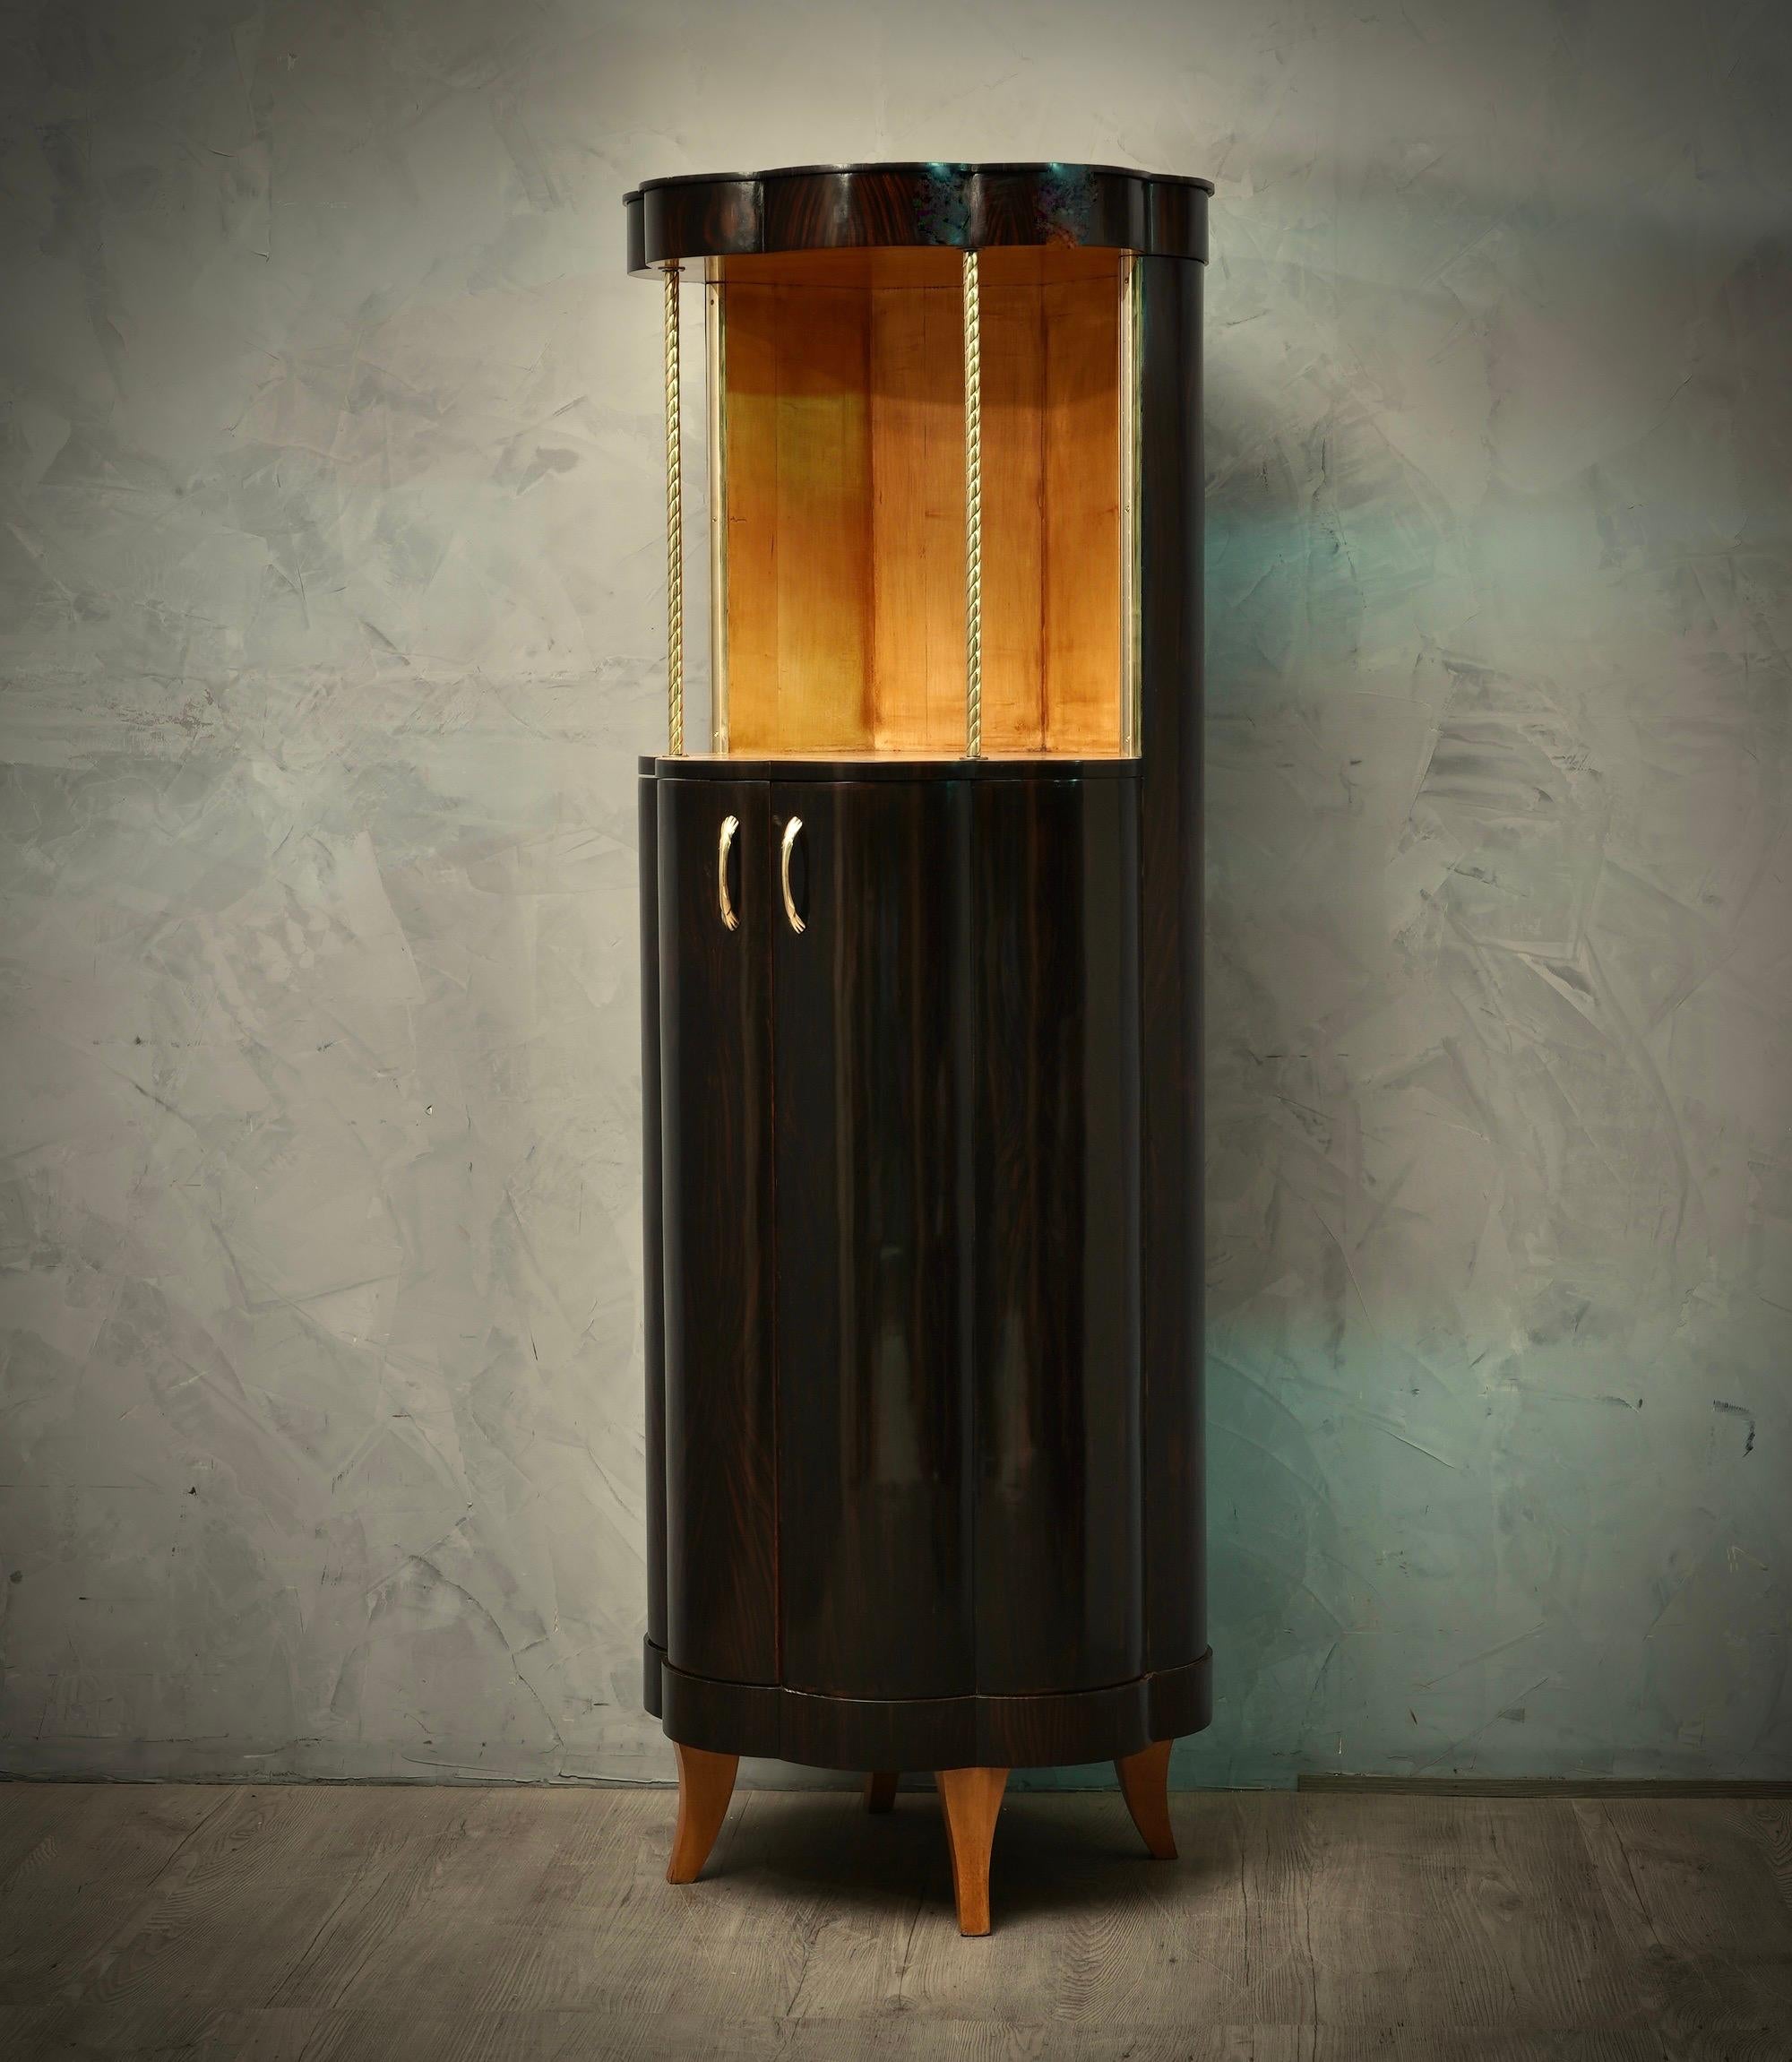 Precious design for a very nice and refined bar cabinet also for the use of uncommon materials.

The cabinets is completely veneered in walnut wood, while on the inside it is finished in maple wood. In fact the combination of the two colors is very